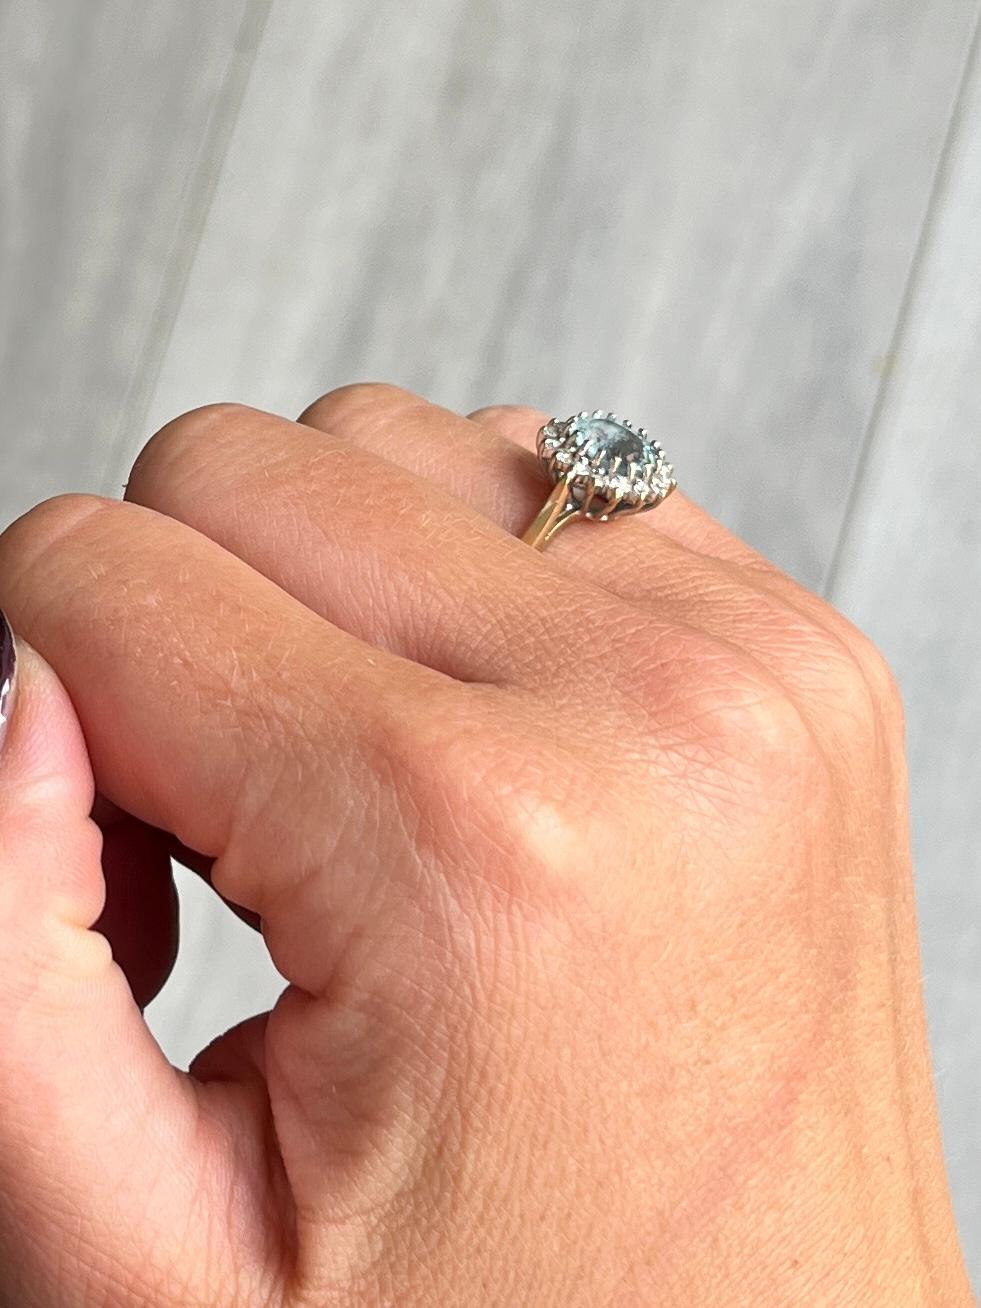 Sitting proud at the centre of this wonderful cluster ring is a sparkling aqua stone. Around the 1ct aqua stone sit a halo of smaller diamonds each measuring approximately 2pts each. All sit on an open work setting with simple shoulders. Hallmarked